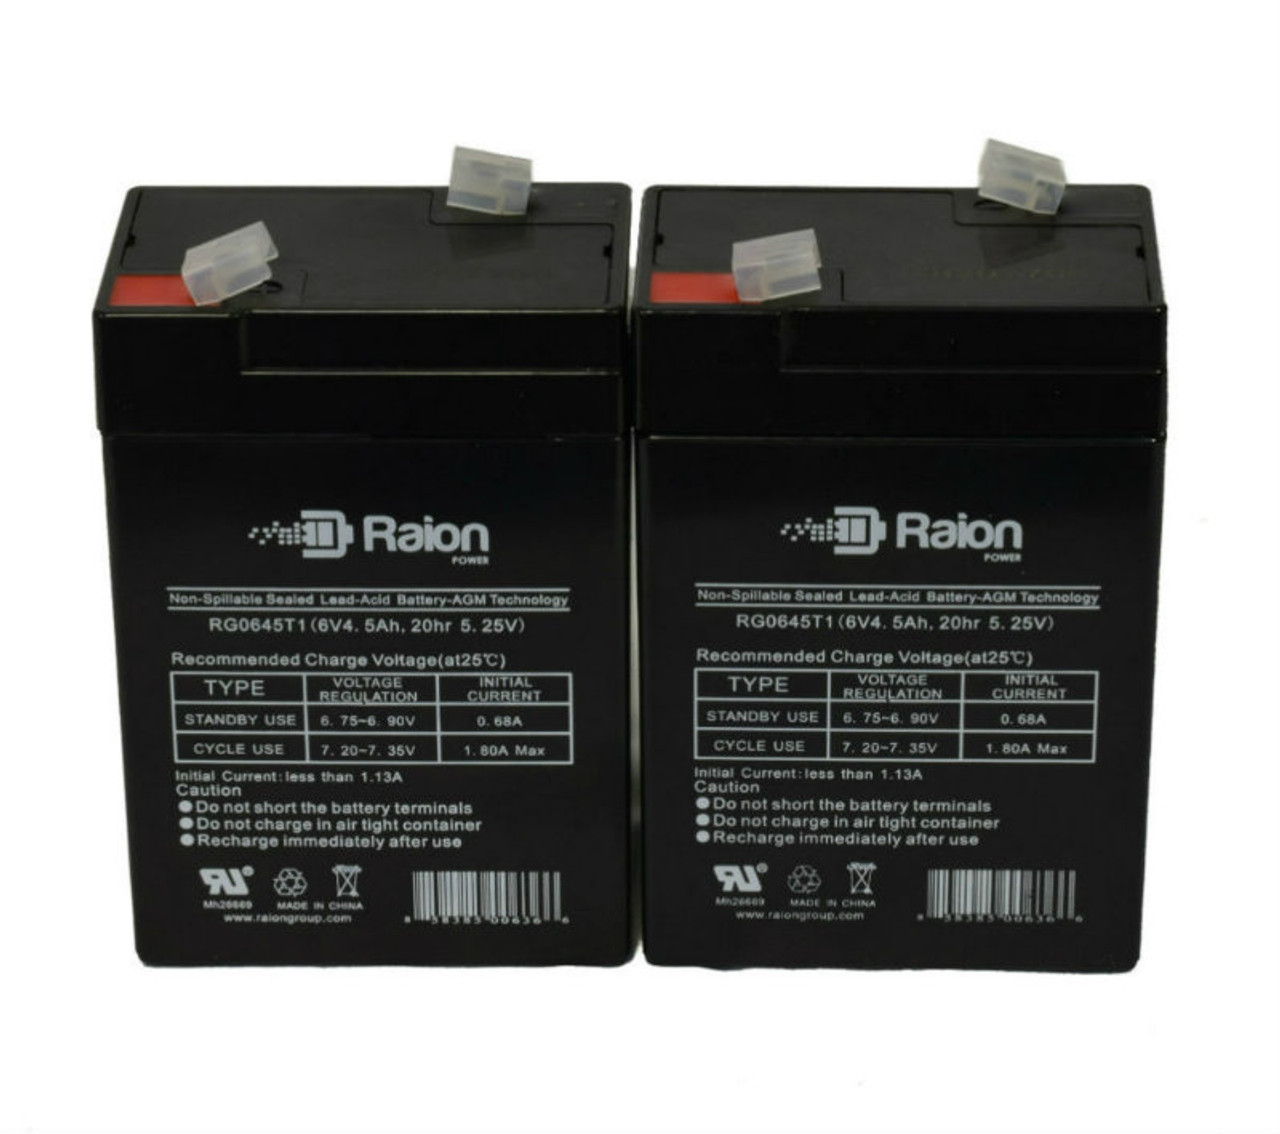 Raion Power 6 Volt 4.5Ah RG0645T1 Replacement Battery for SBB 3FM4.5 - 2 Pack